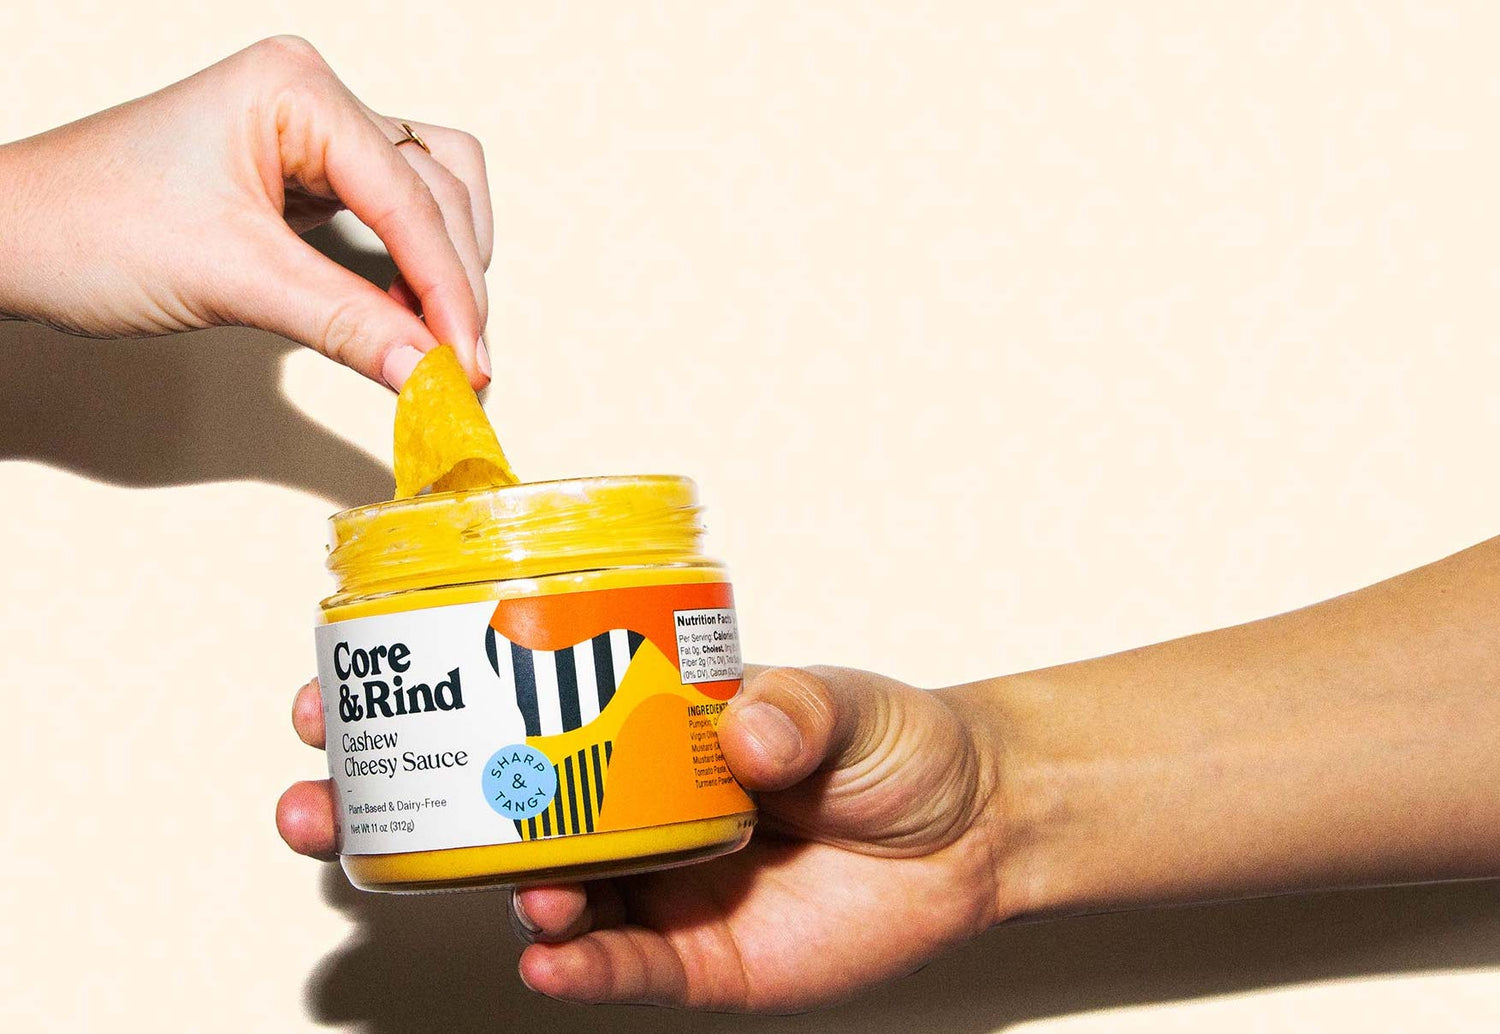 One hand holding a jar of cheesy sauce while another hand dips a chip into the jar